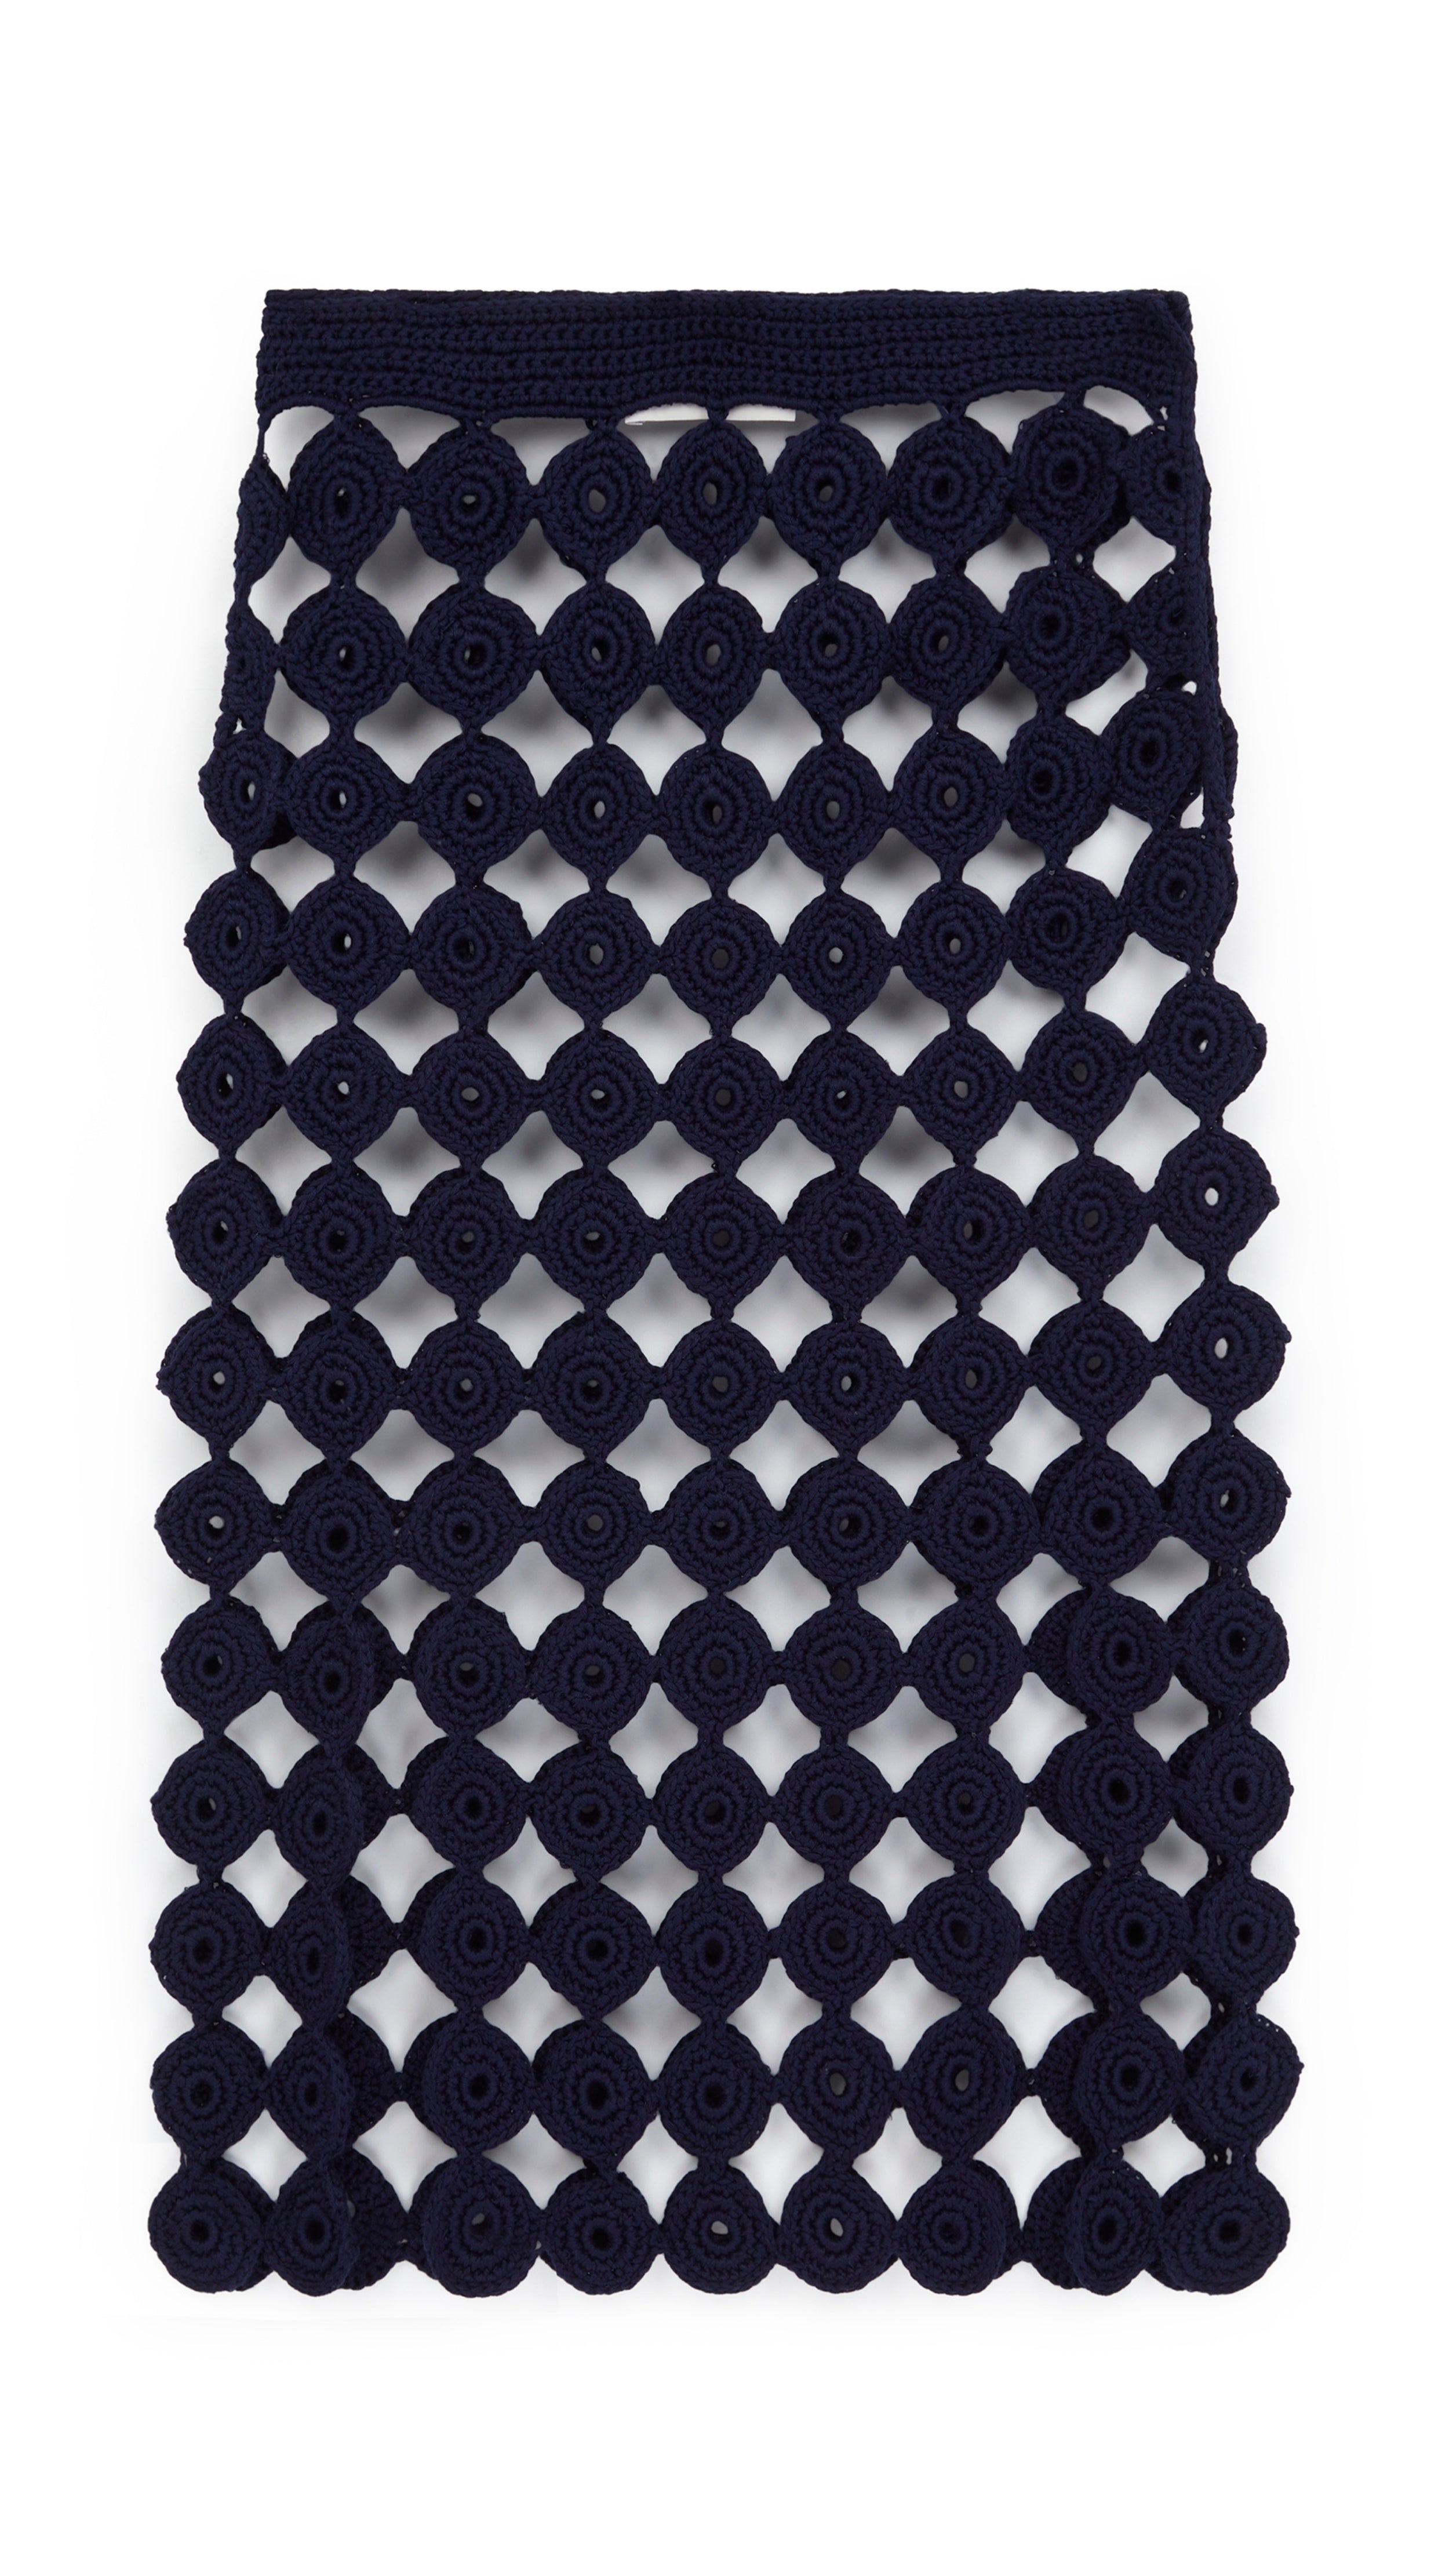 Wales Bonner Stanza Knit Skirt The Stanza Knit Skirt is crafted with an elastic waist and a straight body, falling just below the knee. It&#39;s made from a cotton and lycra blend open knit crochet in navy blue. Product photo shown flat.